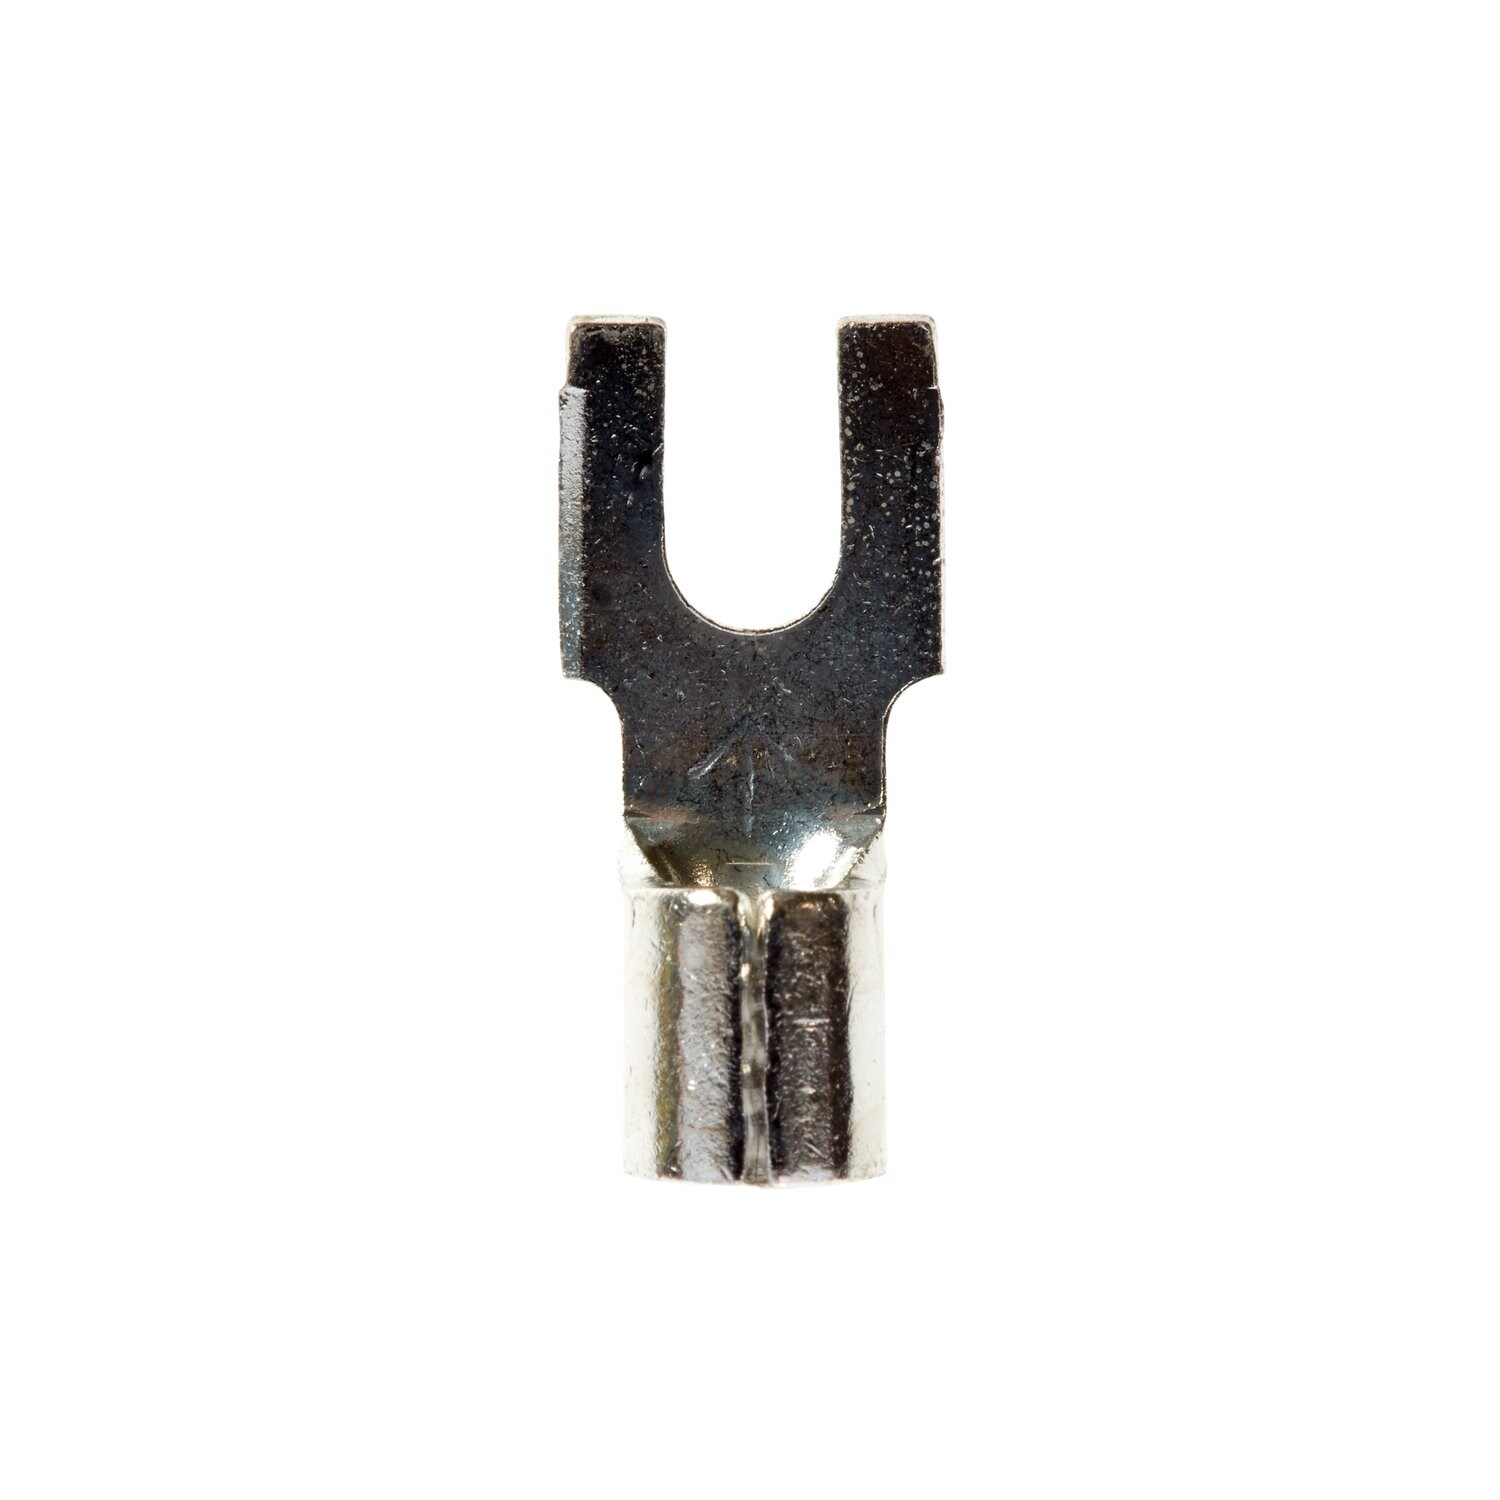 7100164107 - 3M Scotchlok Block Fork, Non-Insulated Butted Seam MU10-6FBK, Stud
Size 6, suitable for use in a terminal block, 500/Case